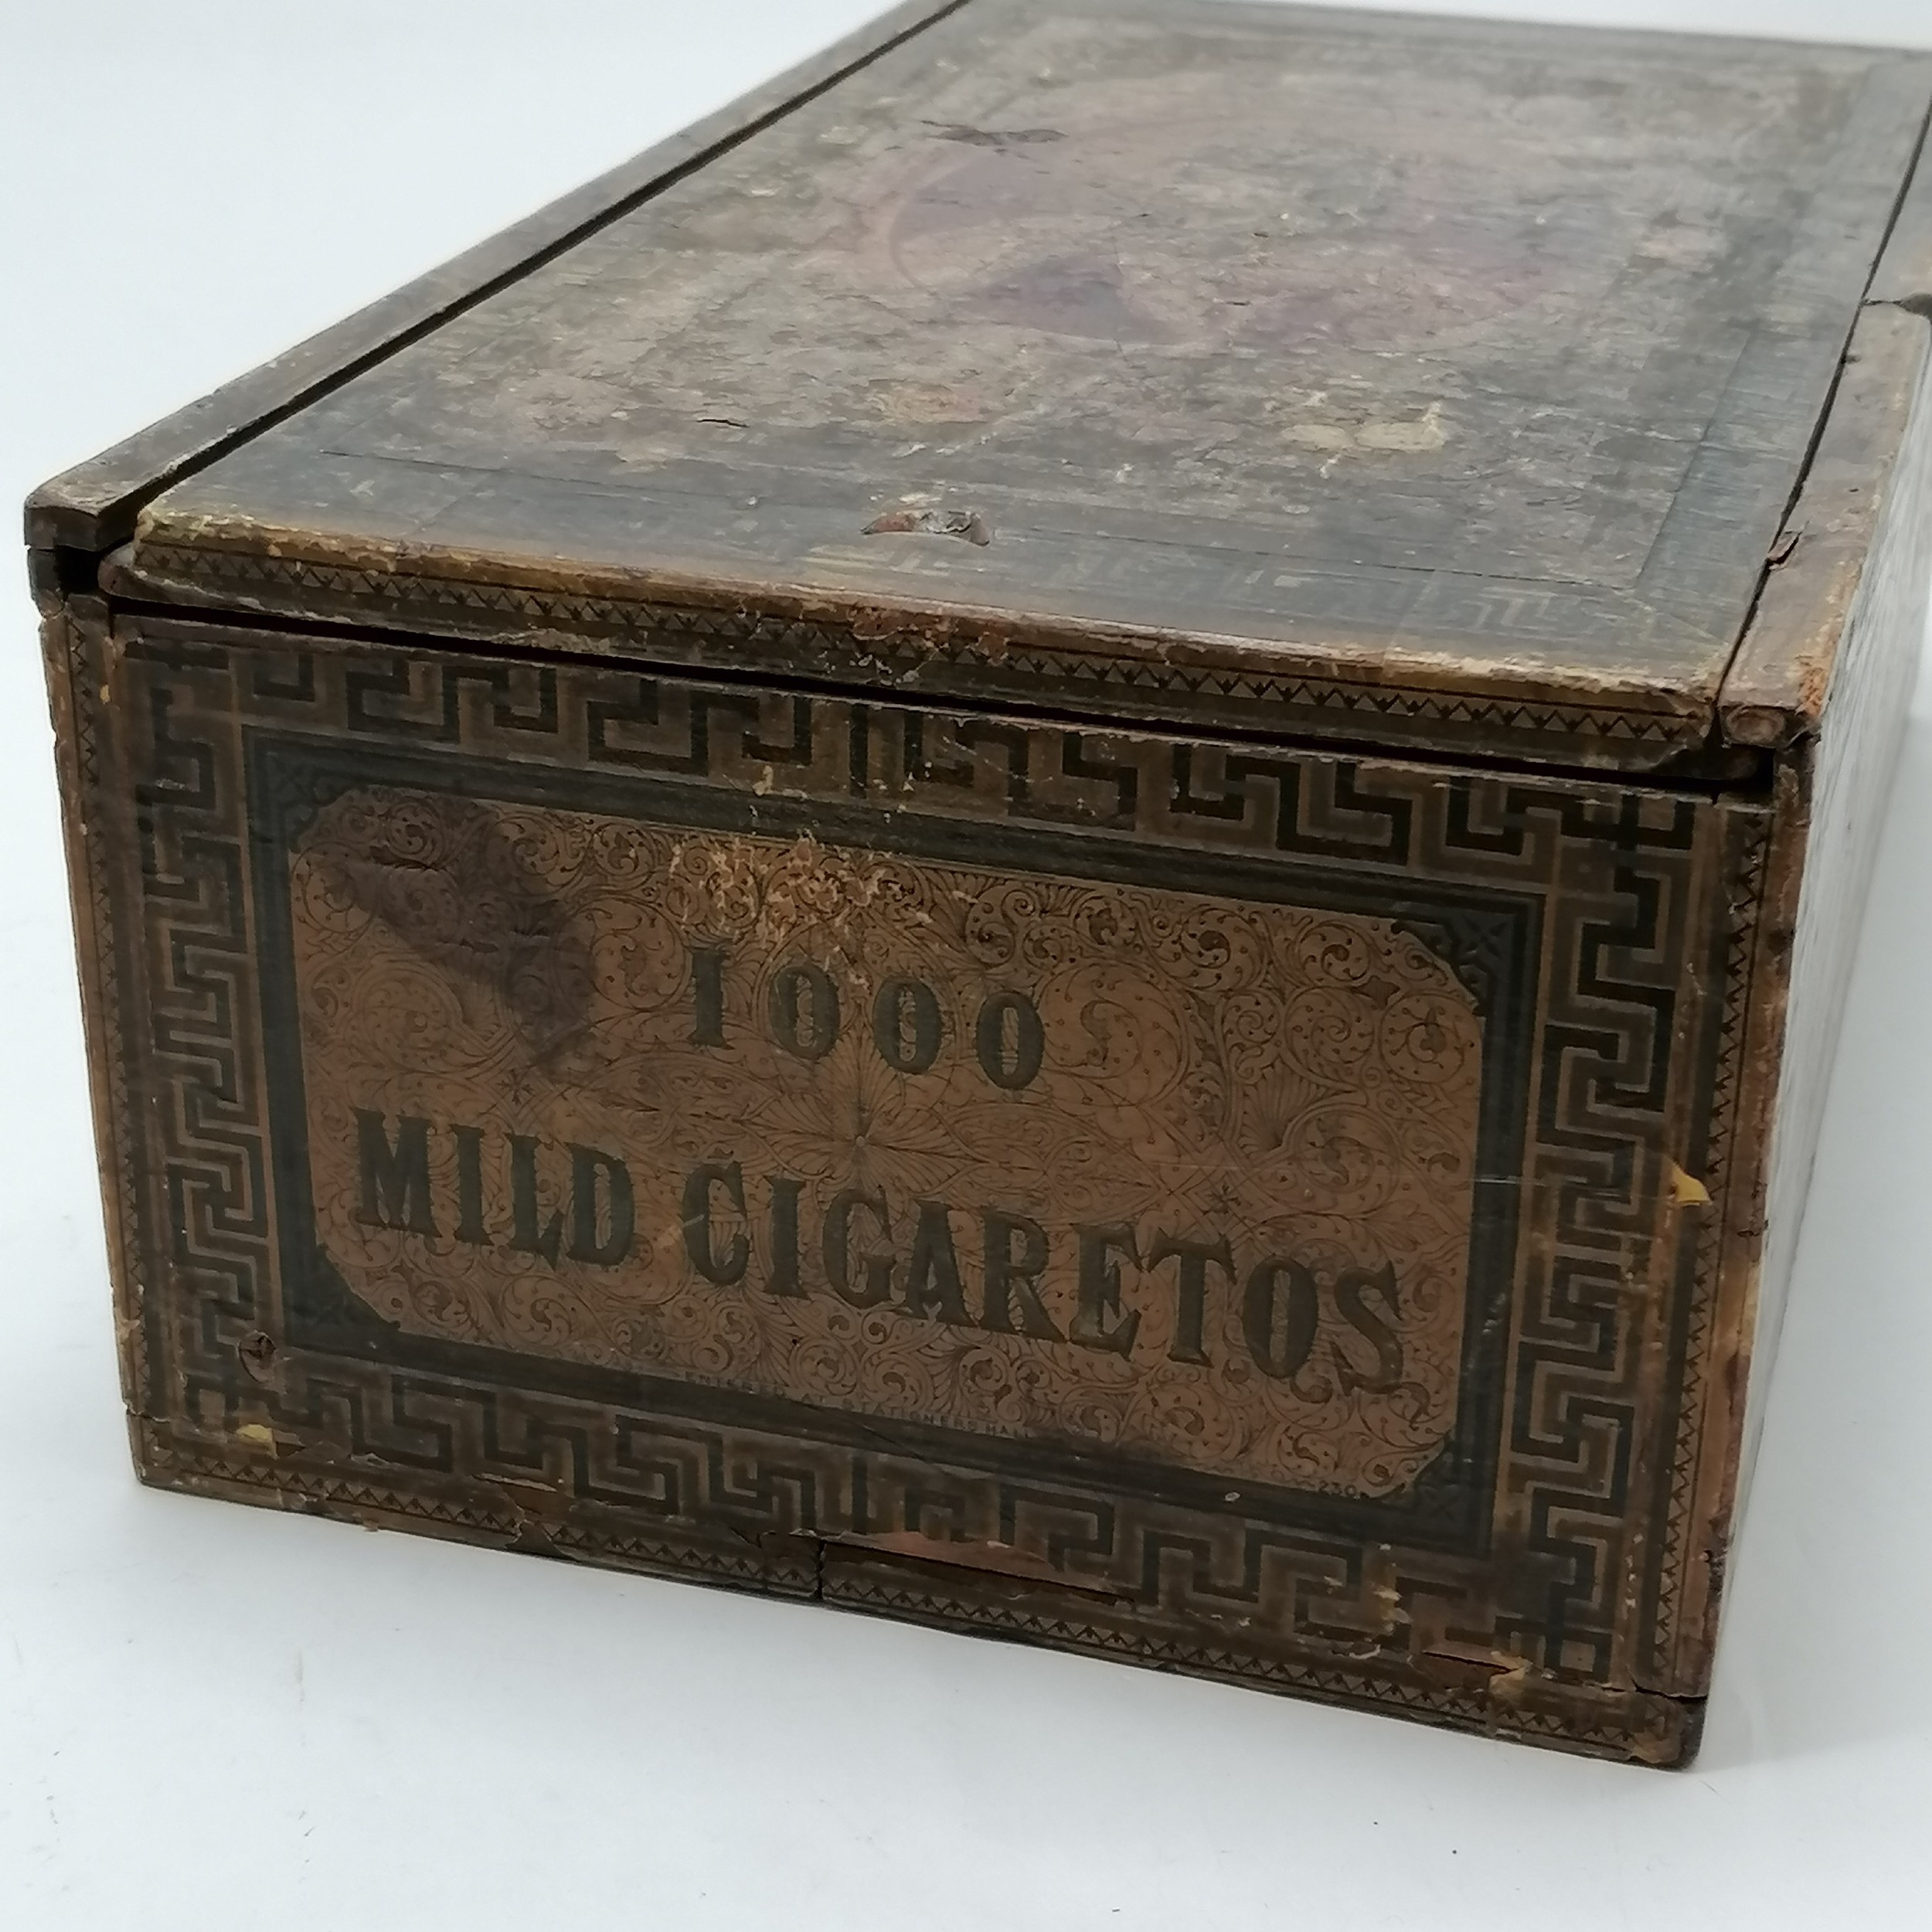 Antique Cope Bros 1000 cigarettes wooden advertising box with sliding lid & greek key detail - - Image 4 of 6